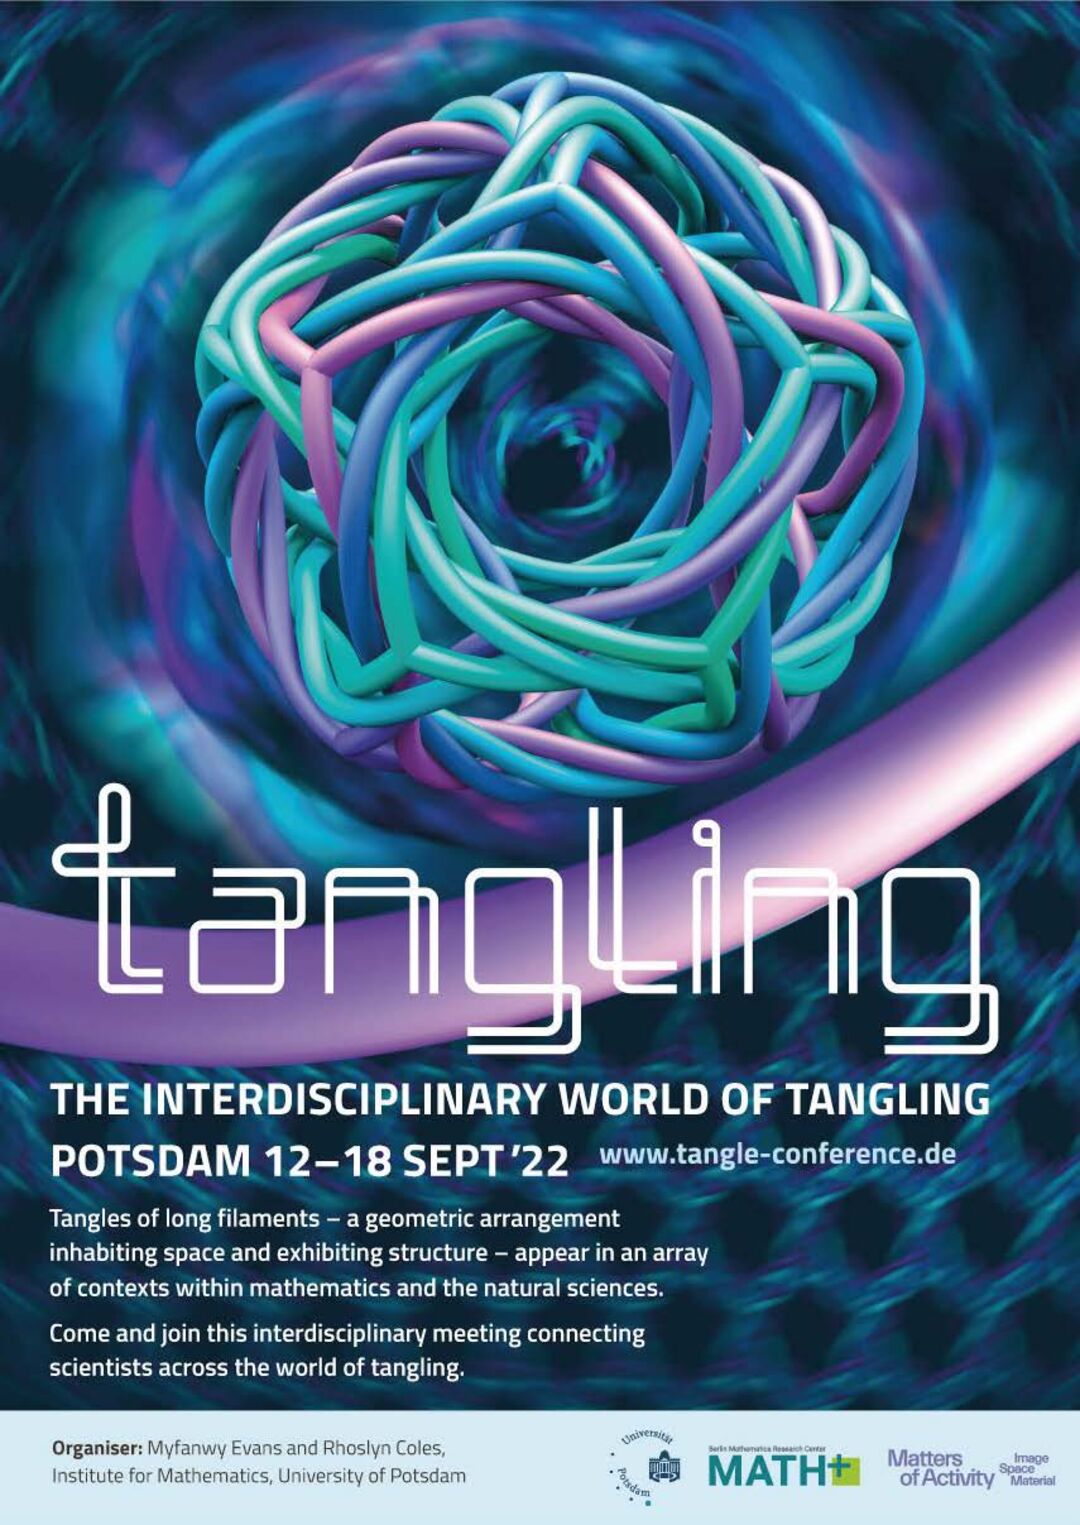 Poster »The Interdisciplinary World of Tangling«. Copyright: Myfwany Evans
